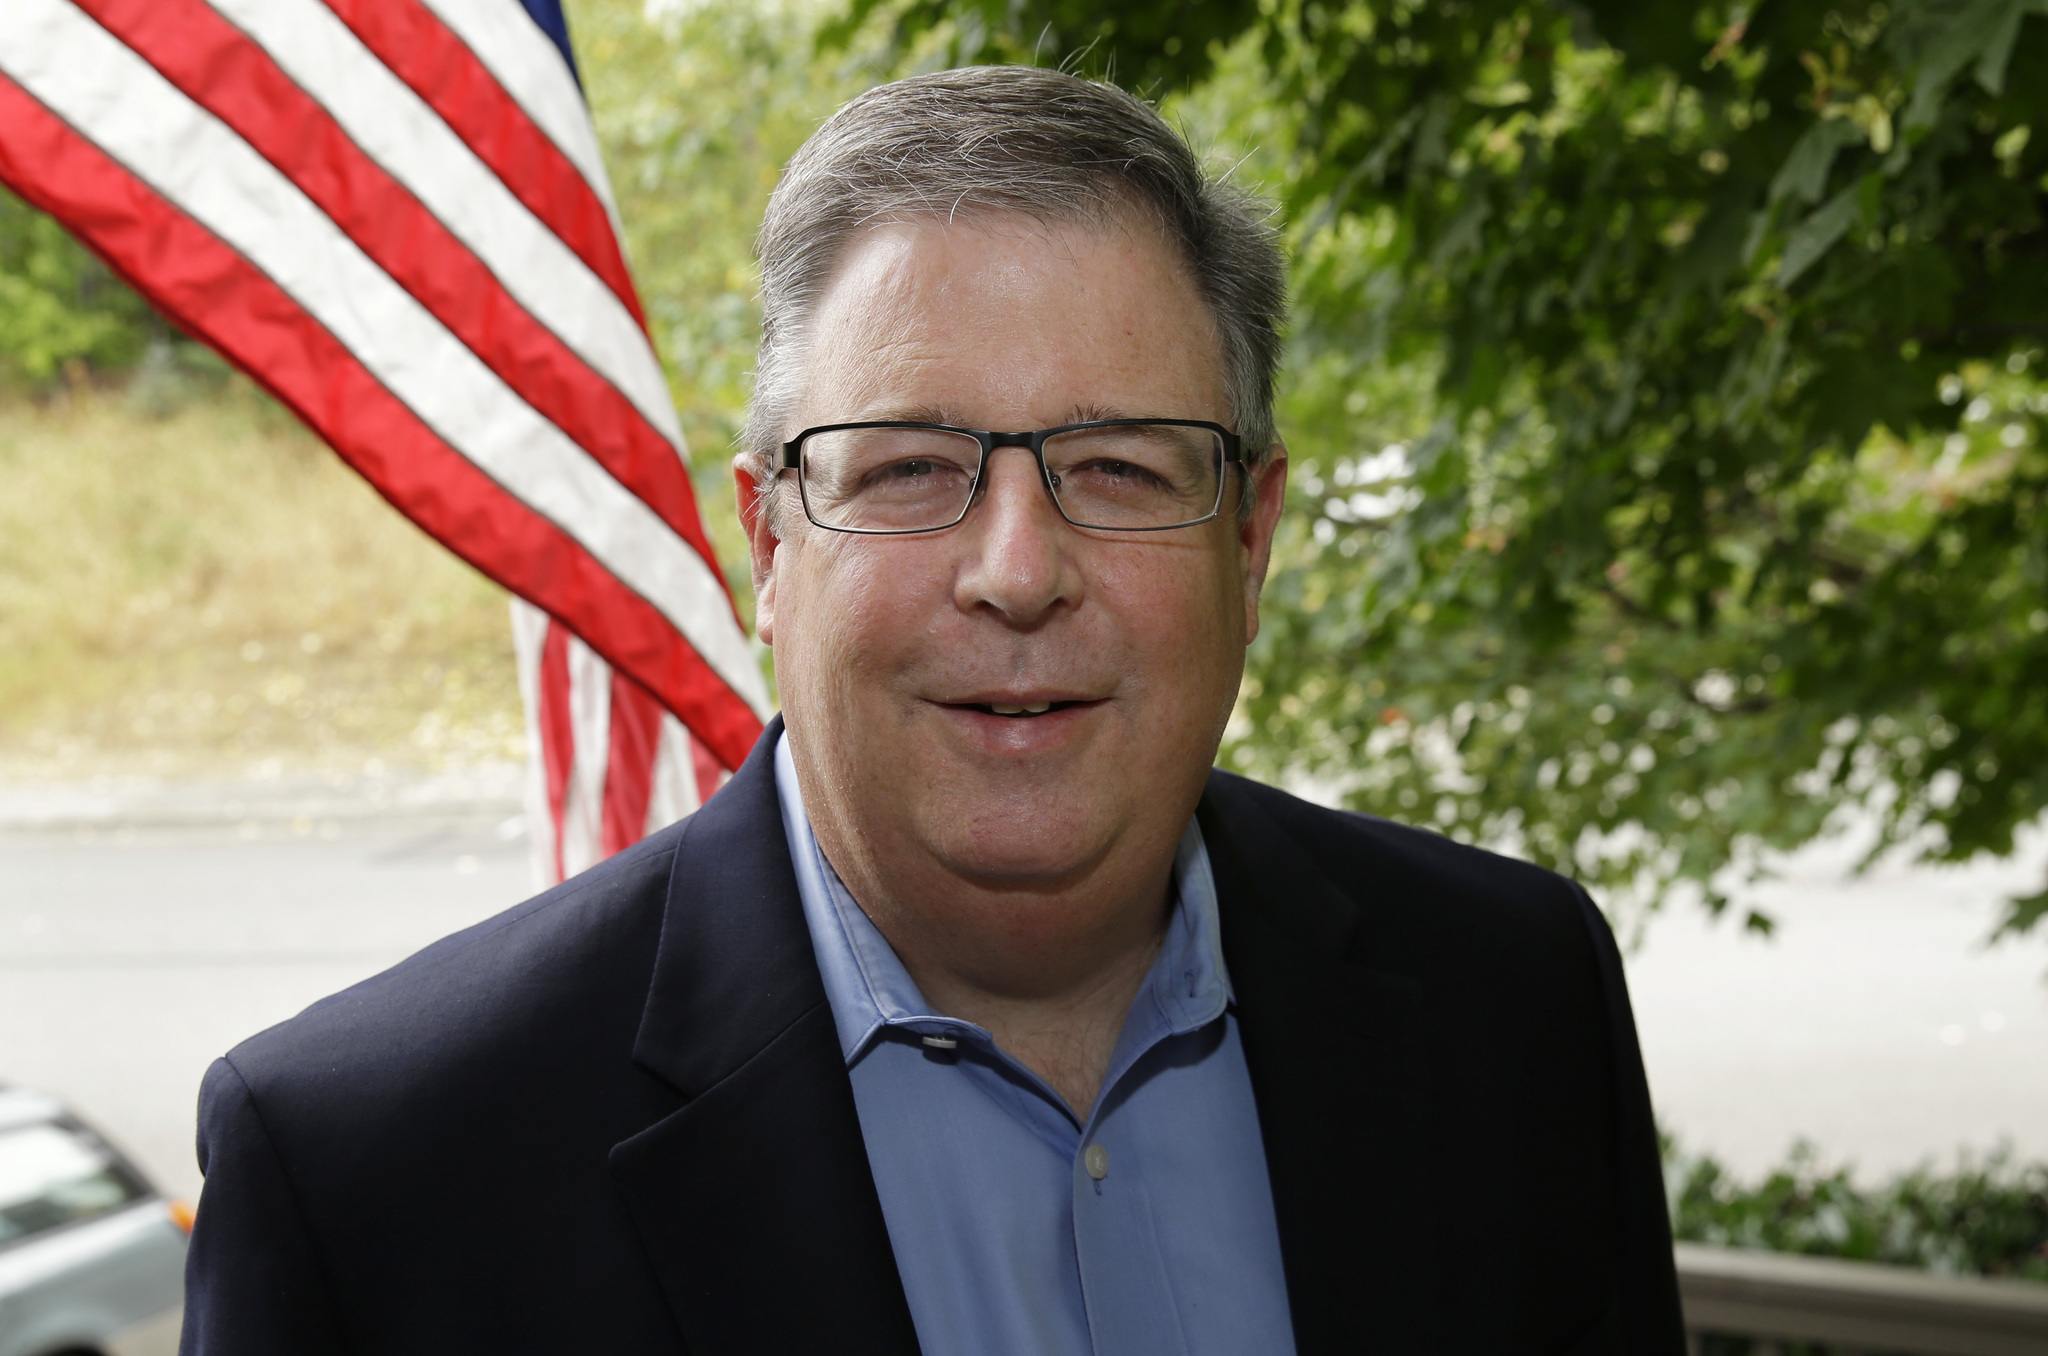 Republican Chris Vance, a former state GOP chairman and King County councilman, is challenging U.S. Sen. Patty Murray, D-Wash., for her seat in the November election. (AP Photo/Ted S. Warren)